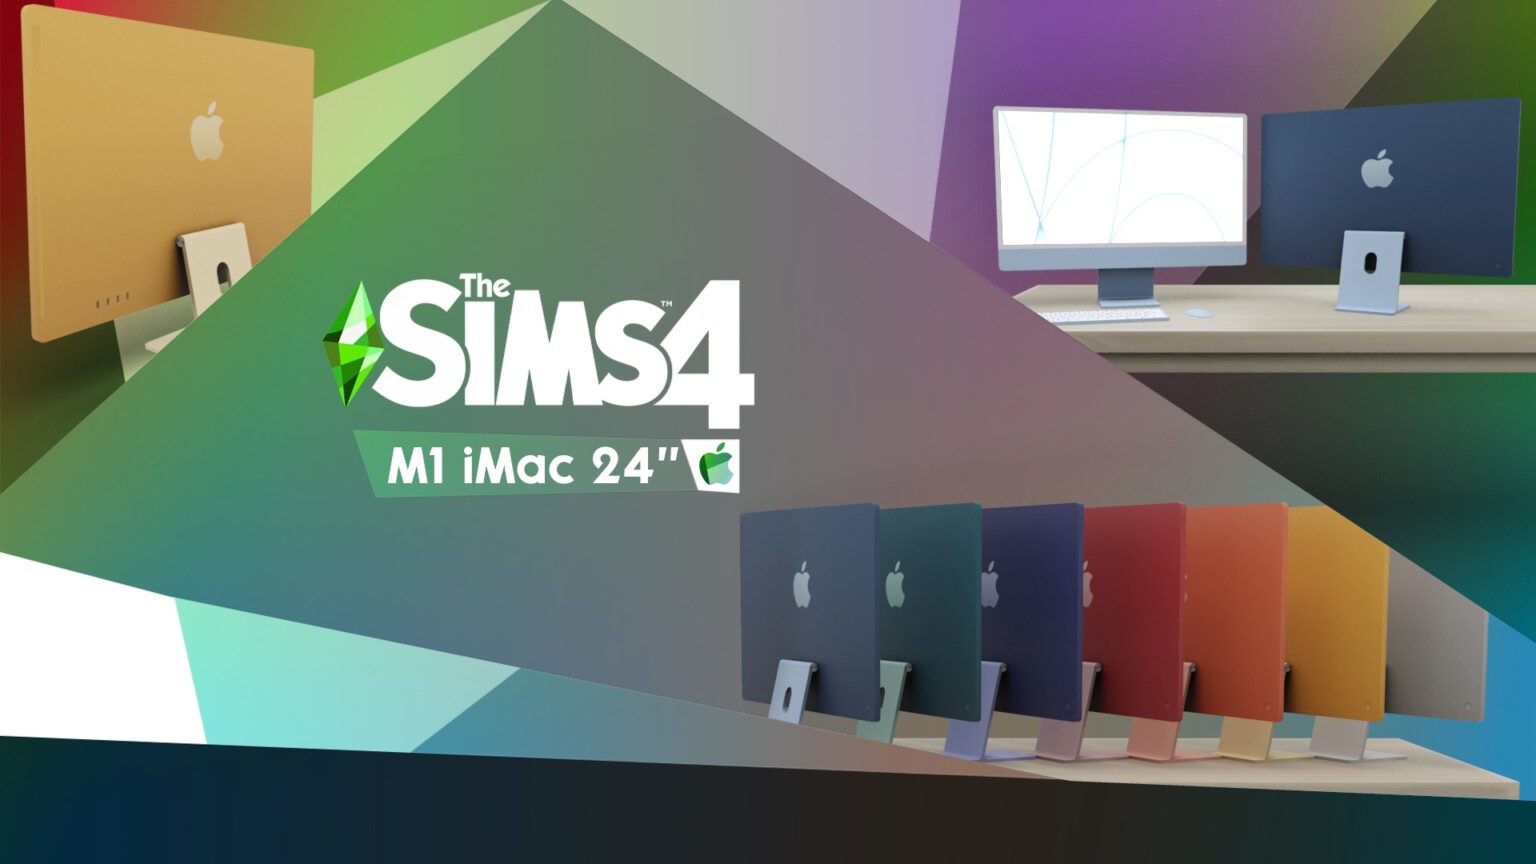 sims 4 for mac free download full version